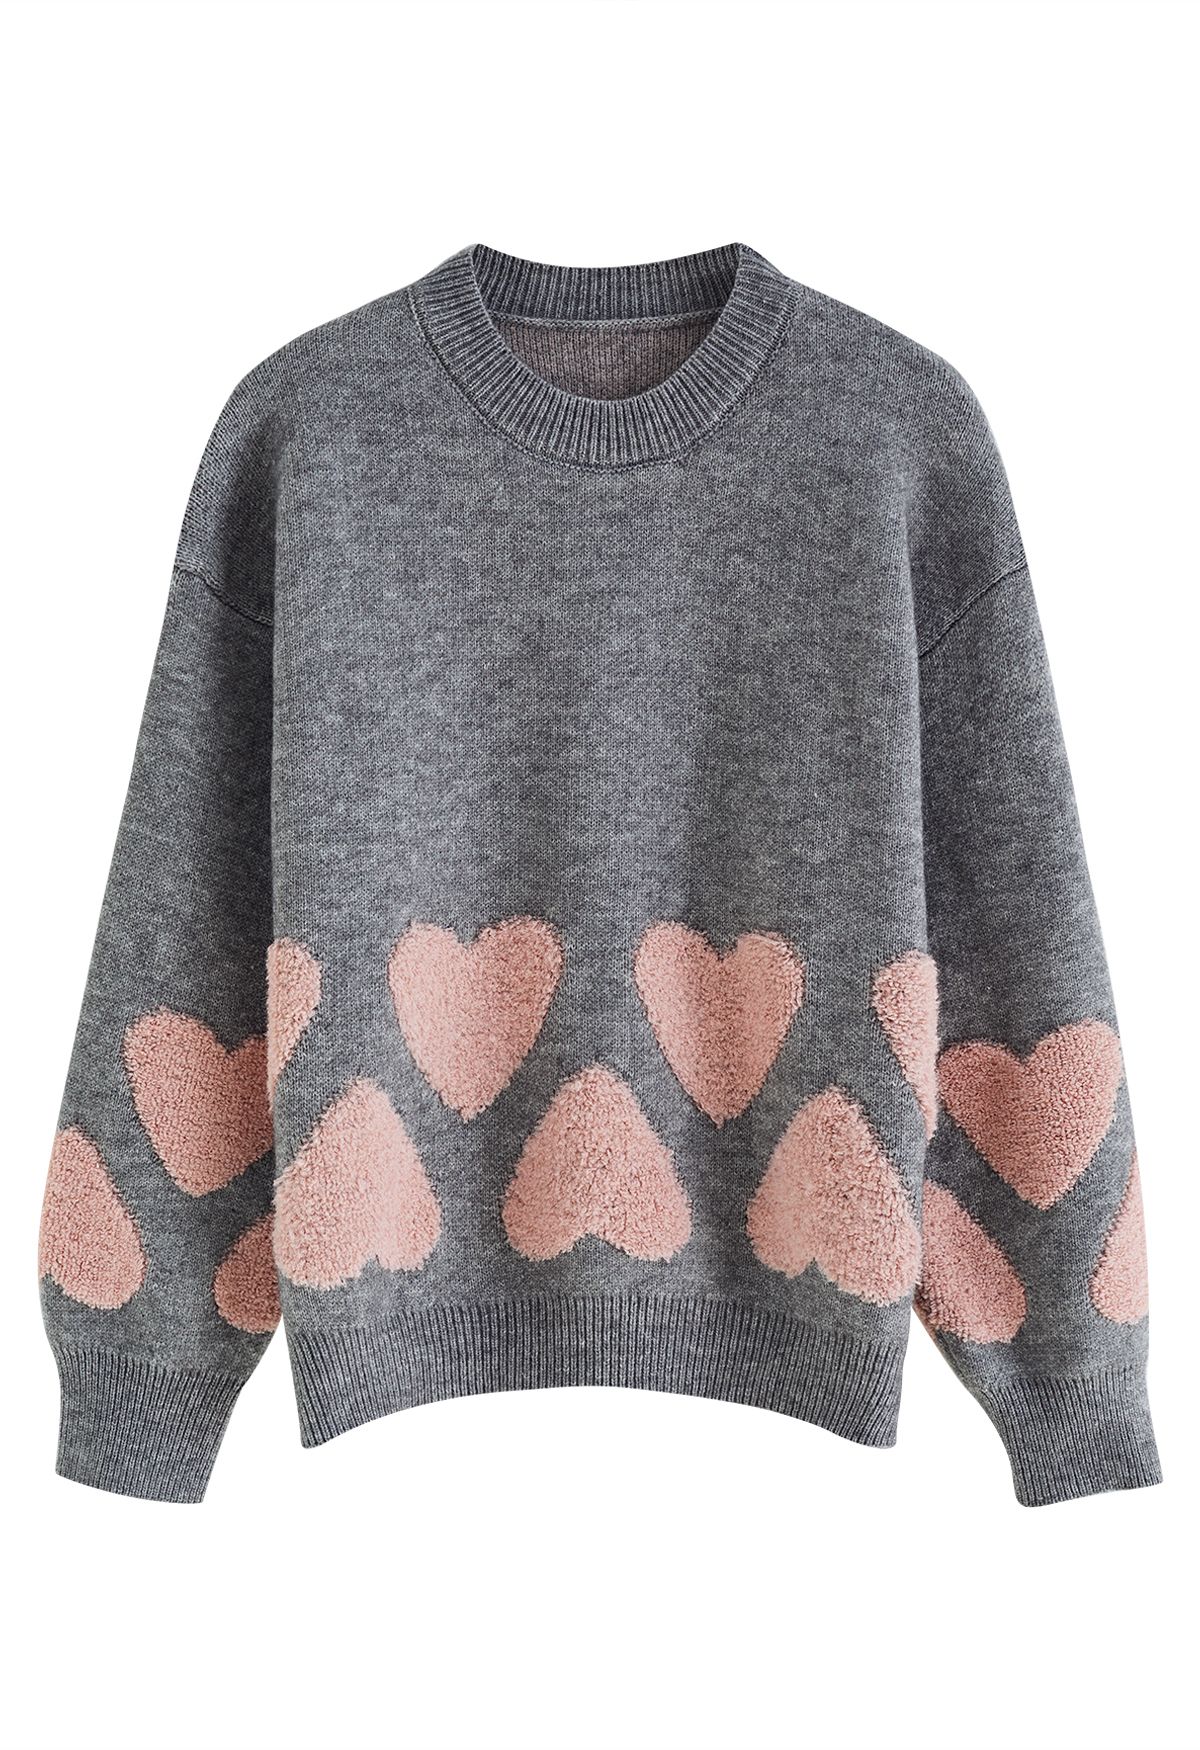 Tender Fuzzy Heart Jacquard Knit Sweater in Grey - Retro, Indie and Unique  Fashion